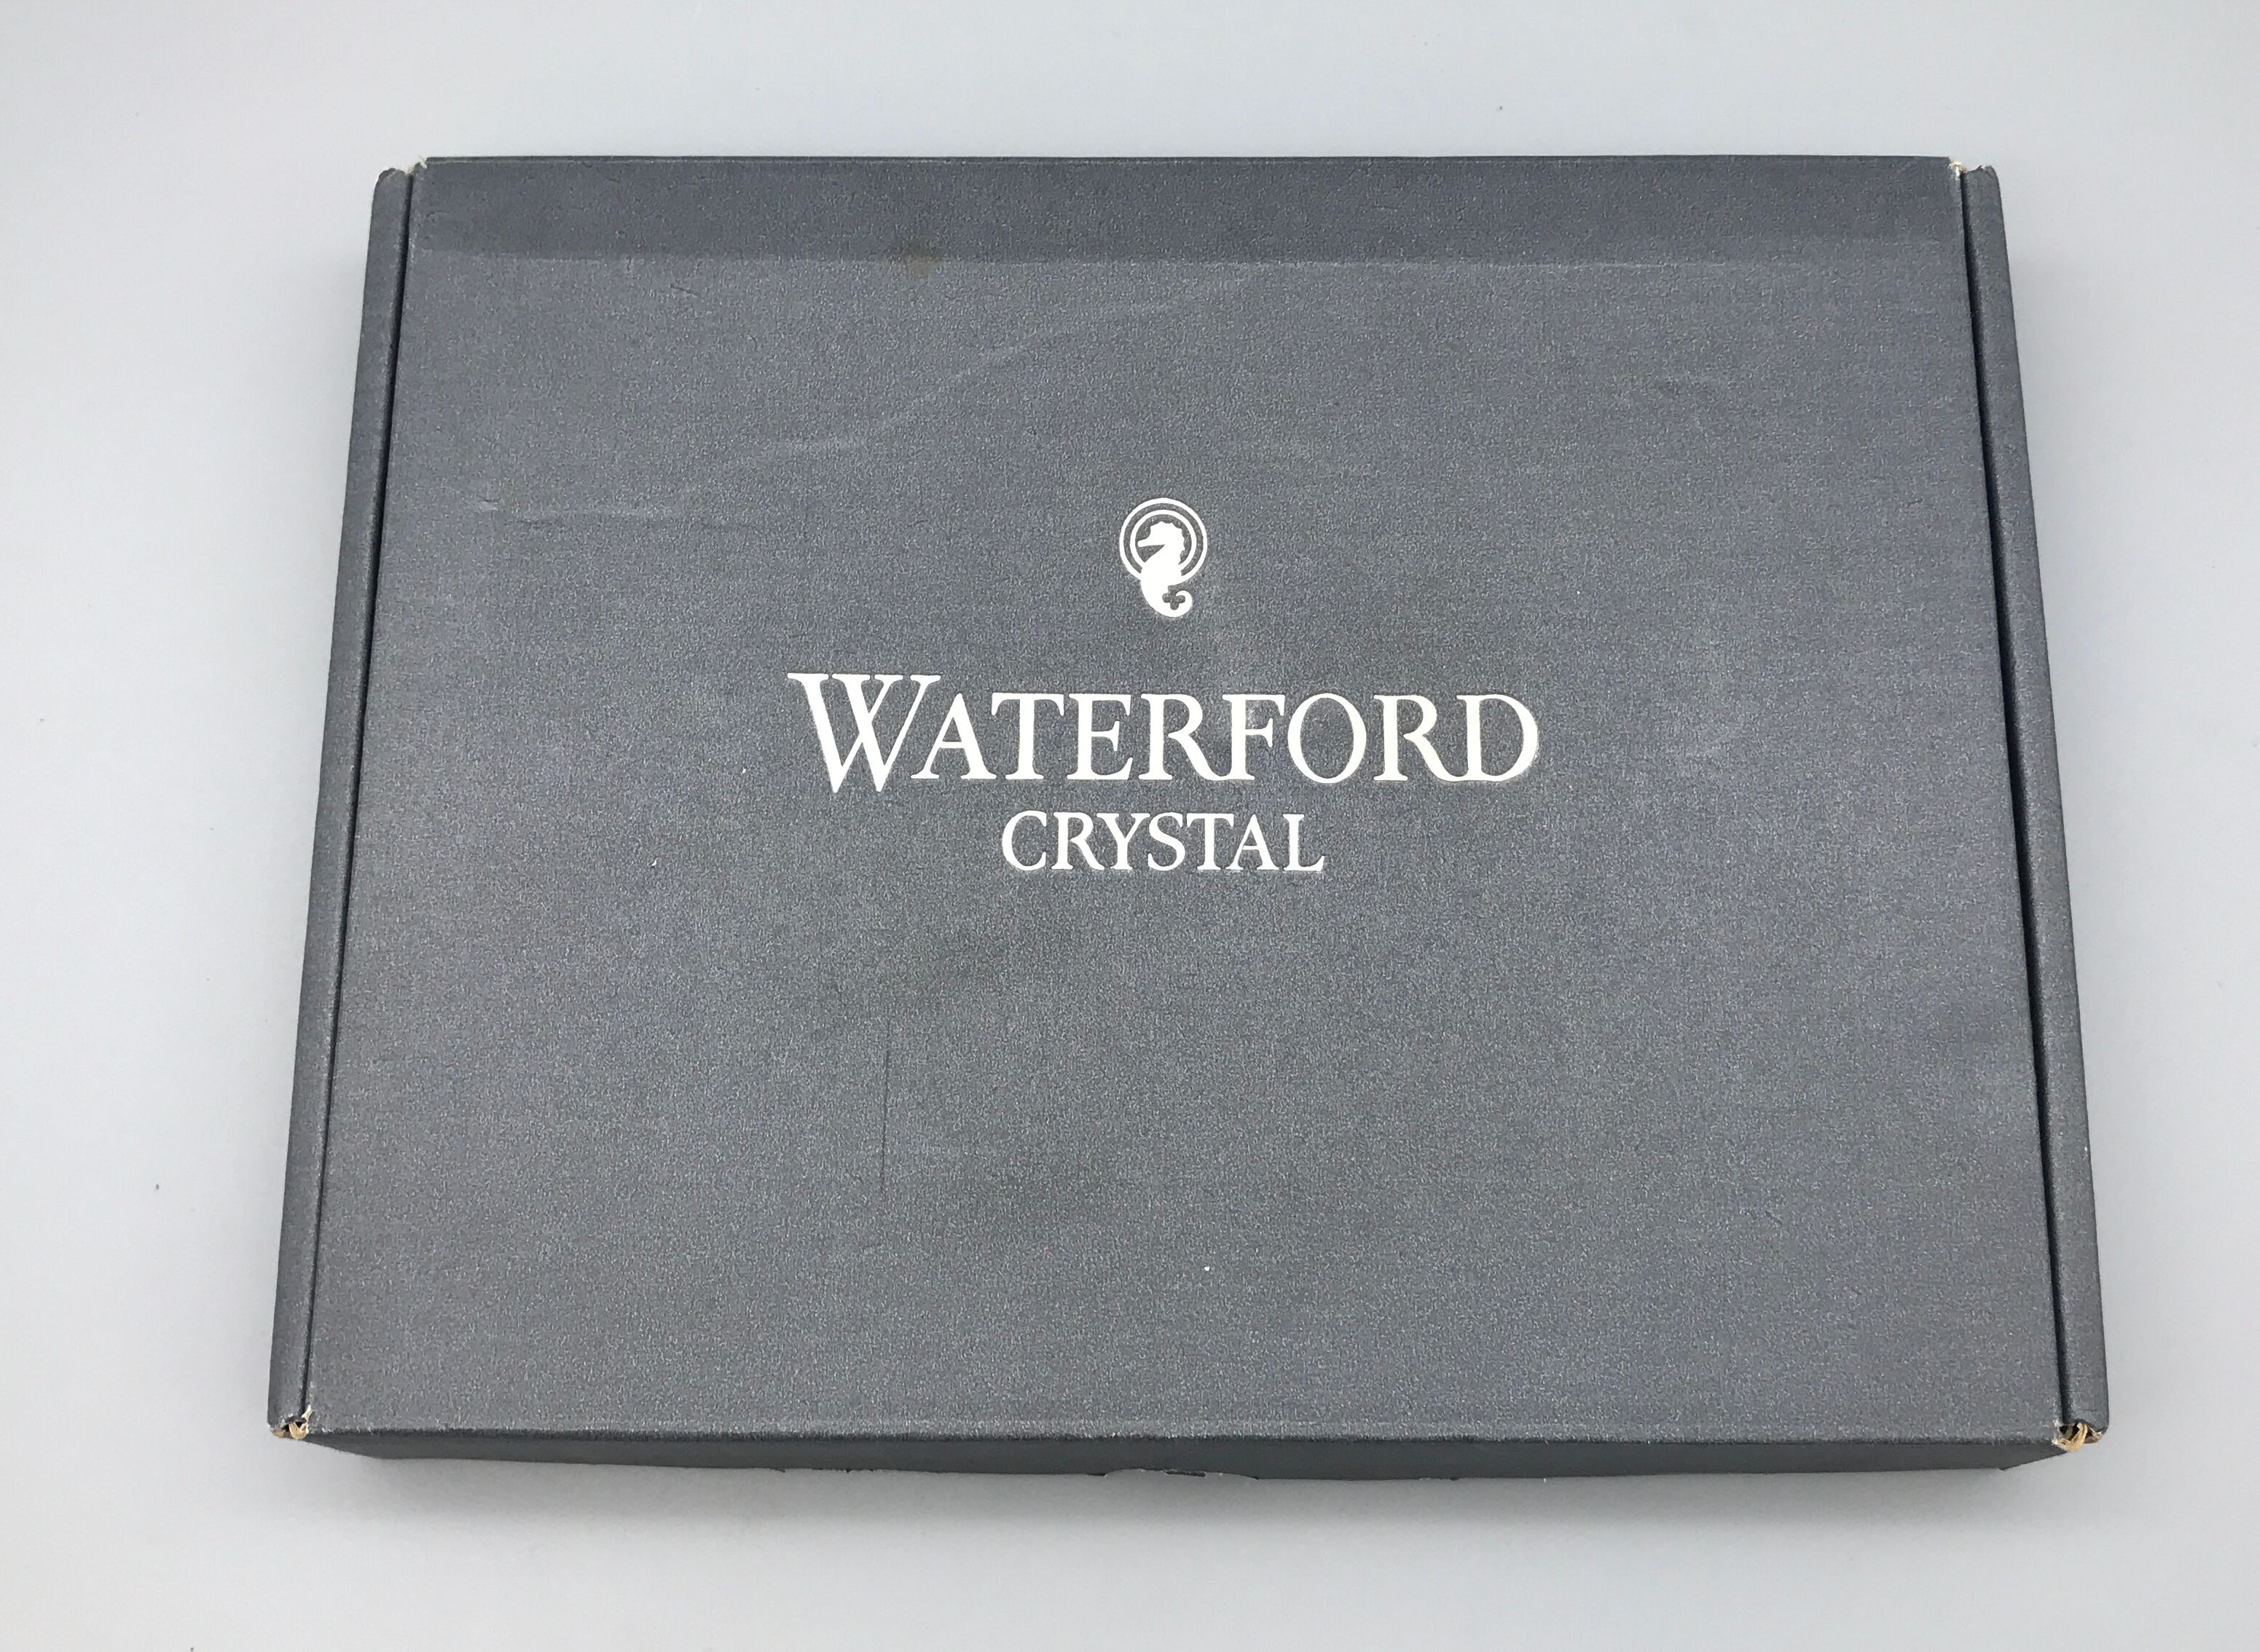 Waterford Crystal Marked Picture Frame - Unused in Box - 6.75" x .5" x 8.75"